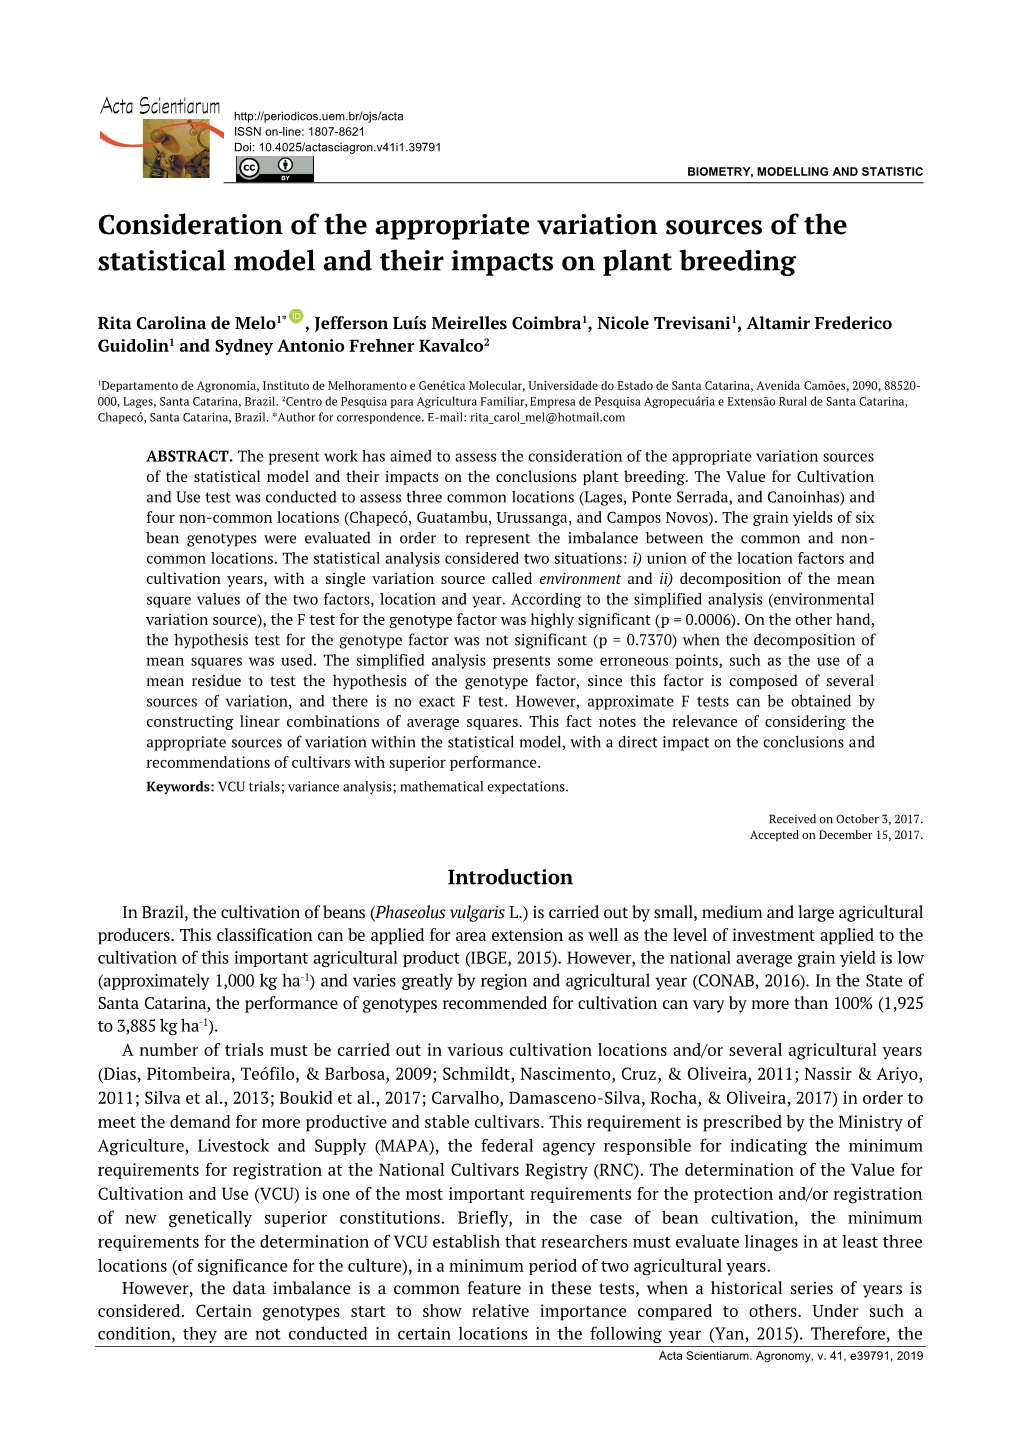 Consideration of the Appropriate Variation Sources of the Statistical Model and Their Impacts on Plant Breeding